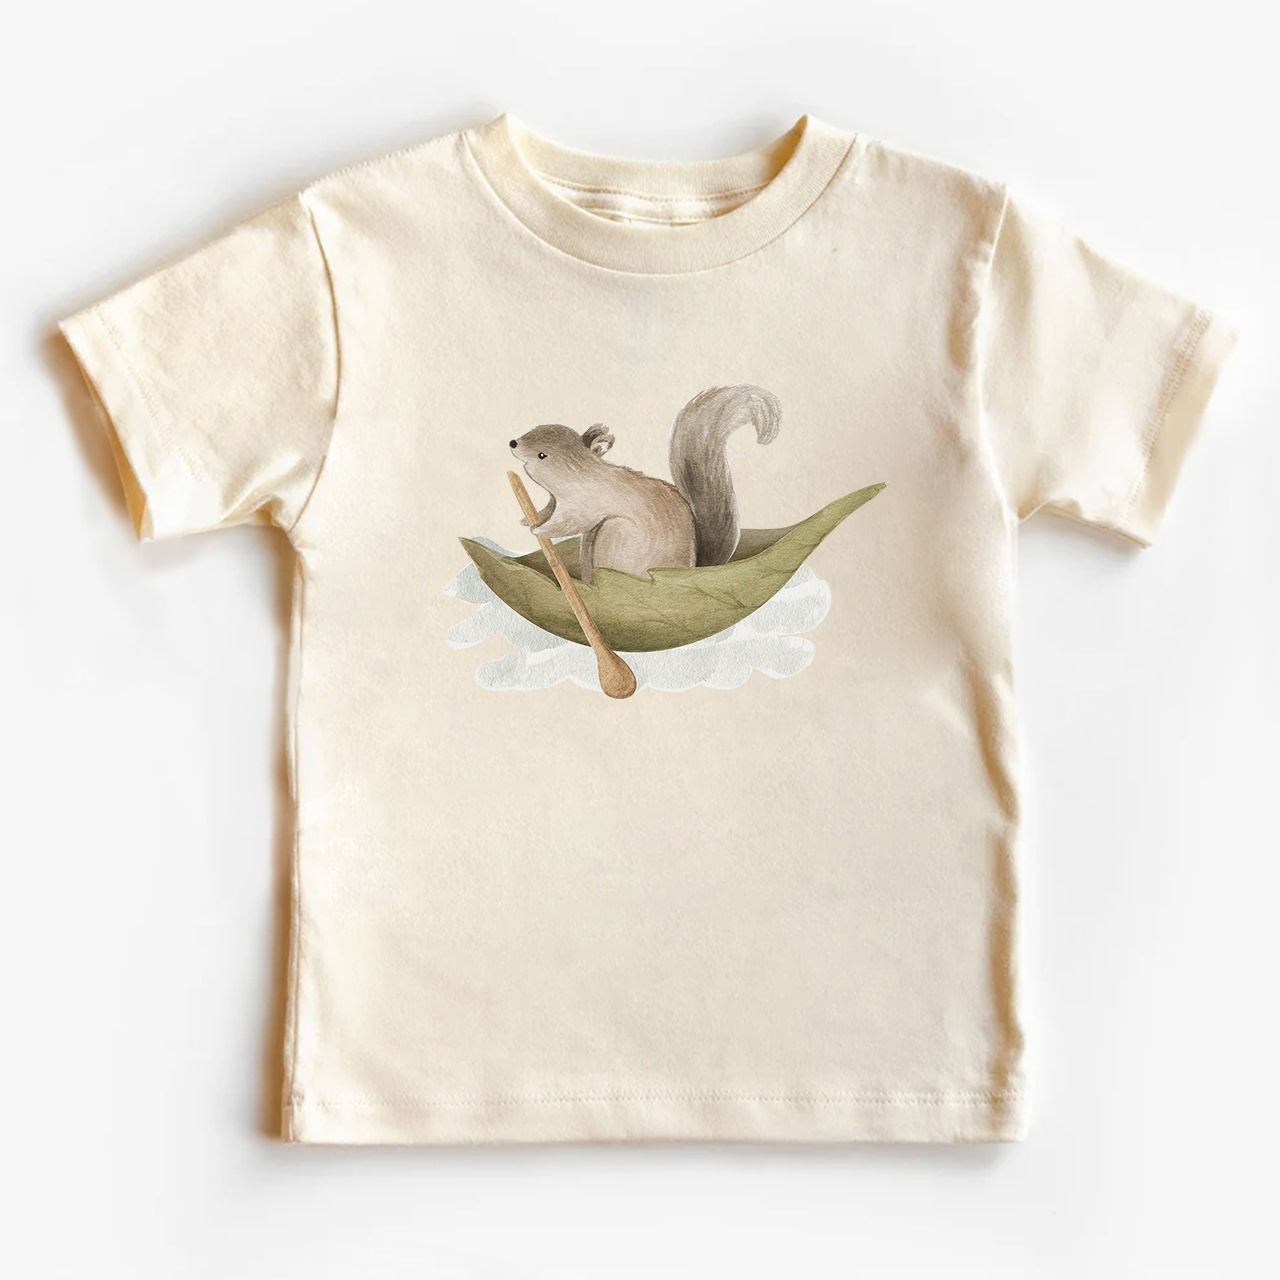 Little Squirrel Rowing Shirt For Kids